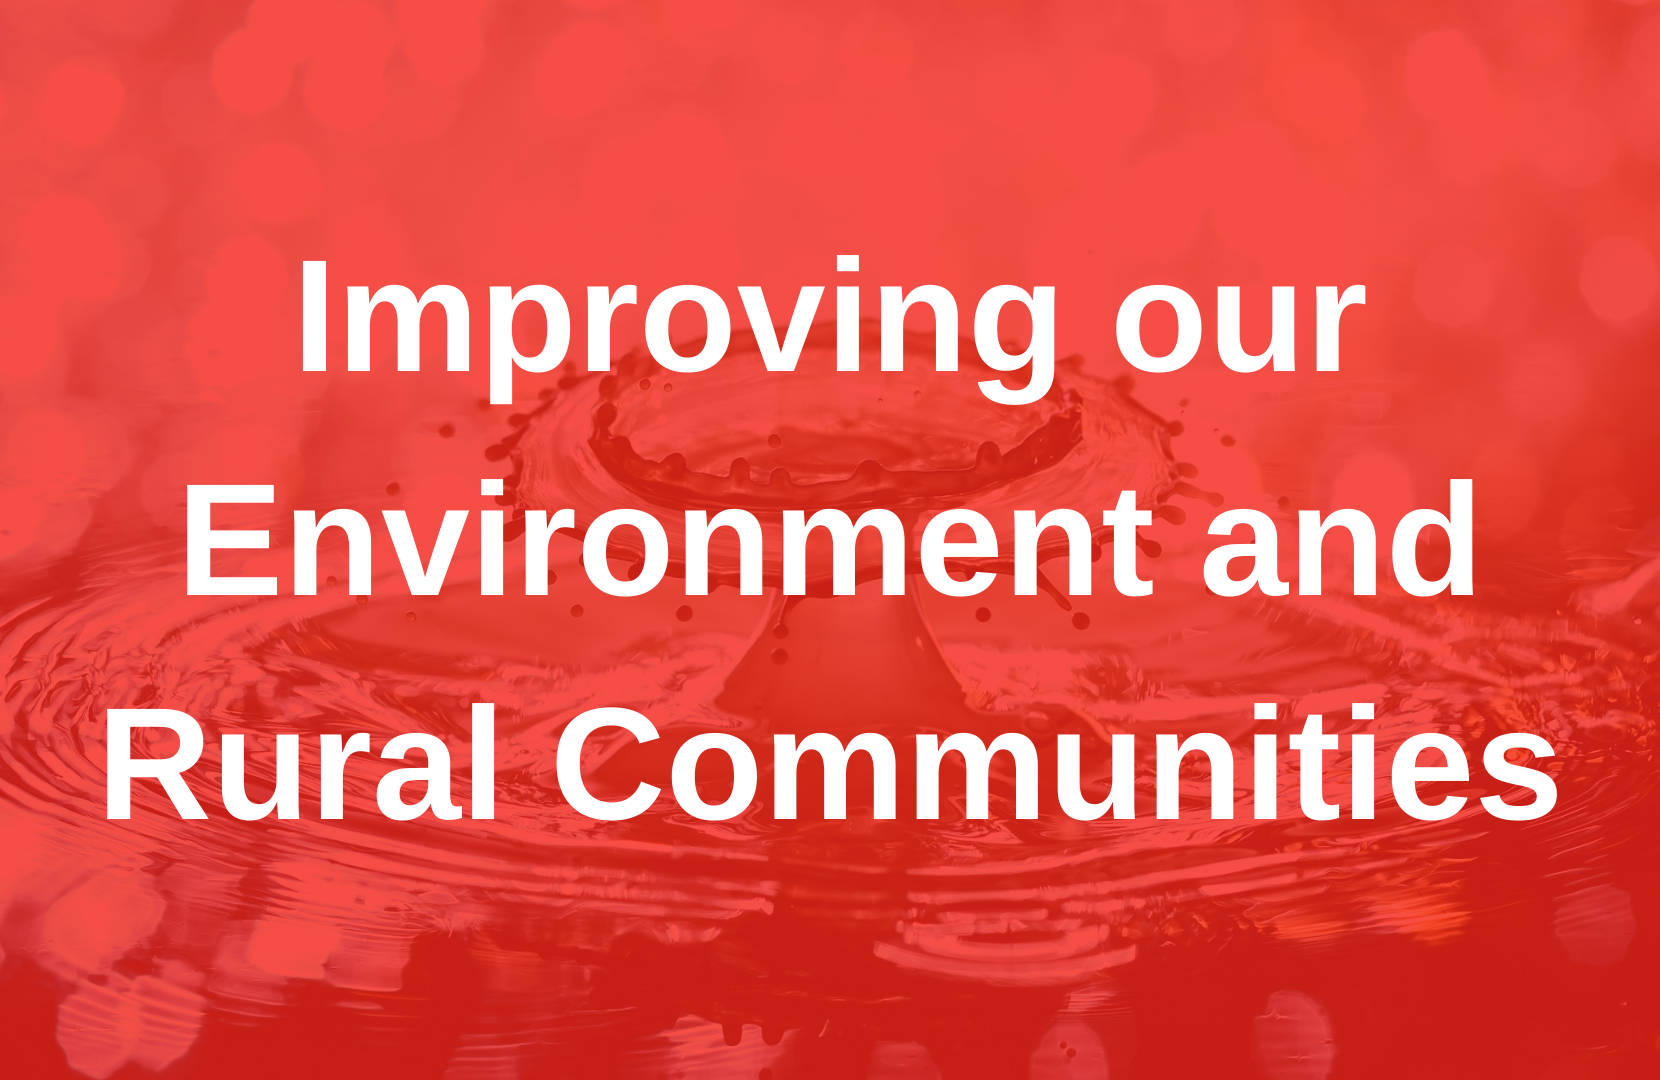 Improving our Environment and Rural Communities